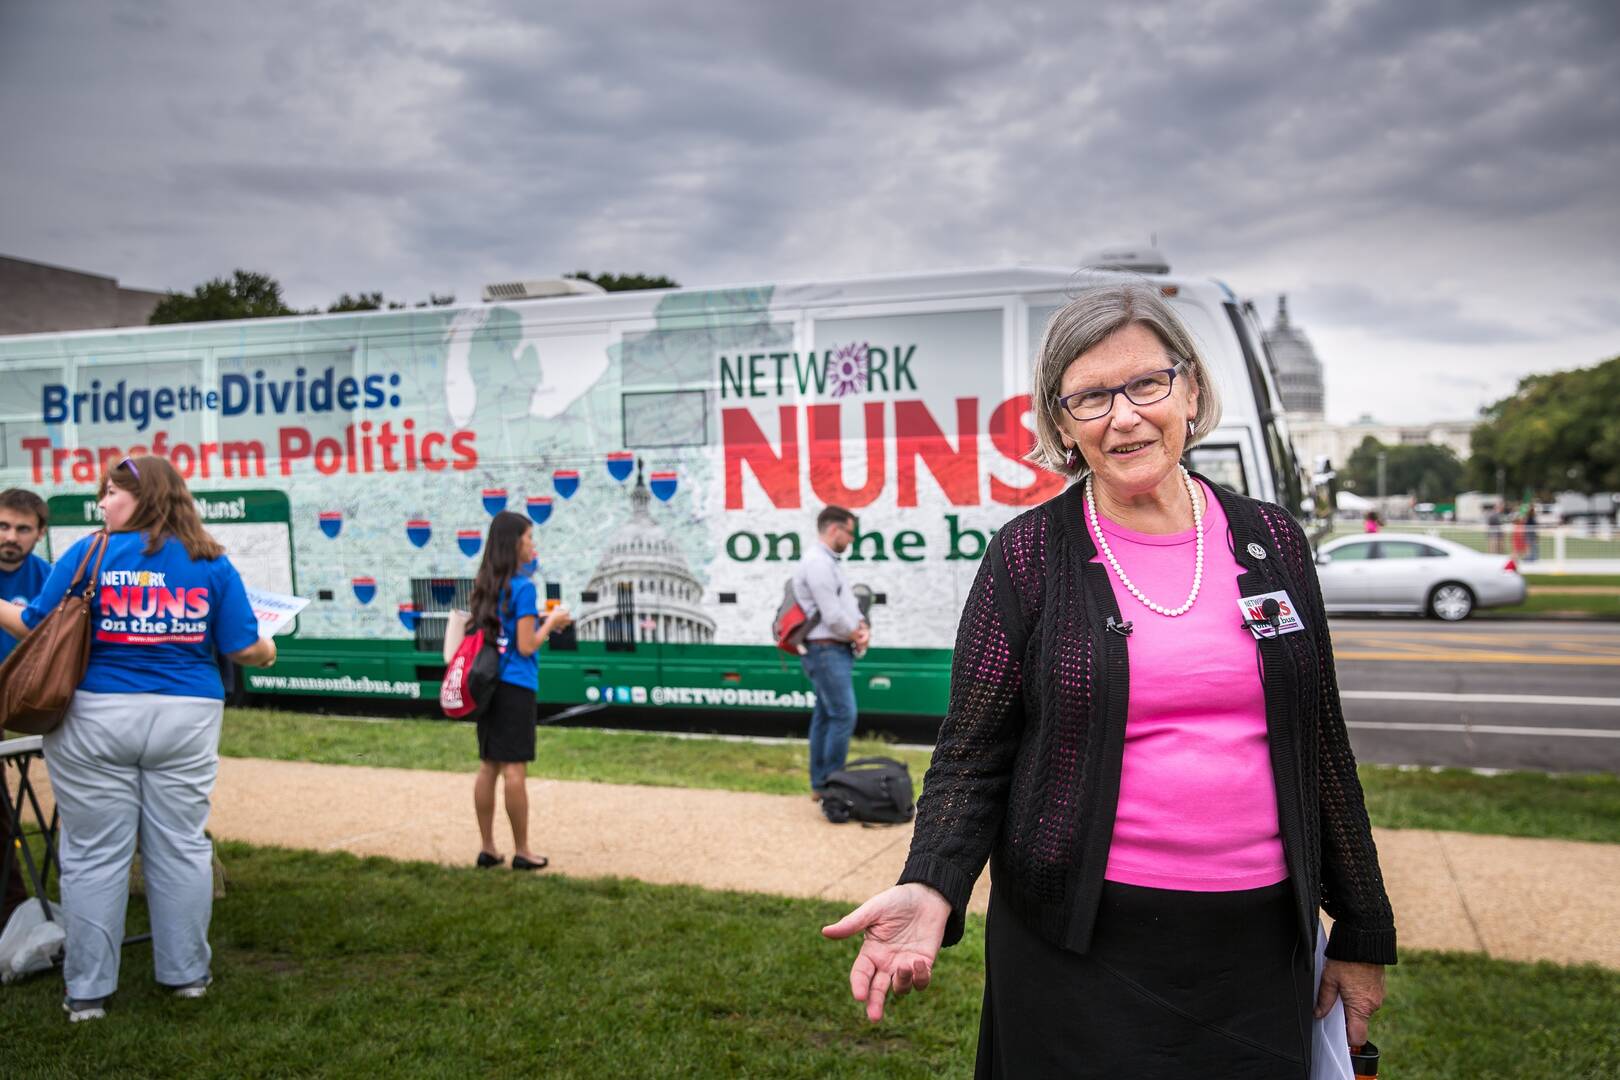 Sister Simone Campbell, executive director of Network, with the Nuns on the Bus campaign in Washington, D.C., on Sept. 22, 2015. (CNS photo/Lisa Johnston, St. Louis Review)